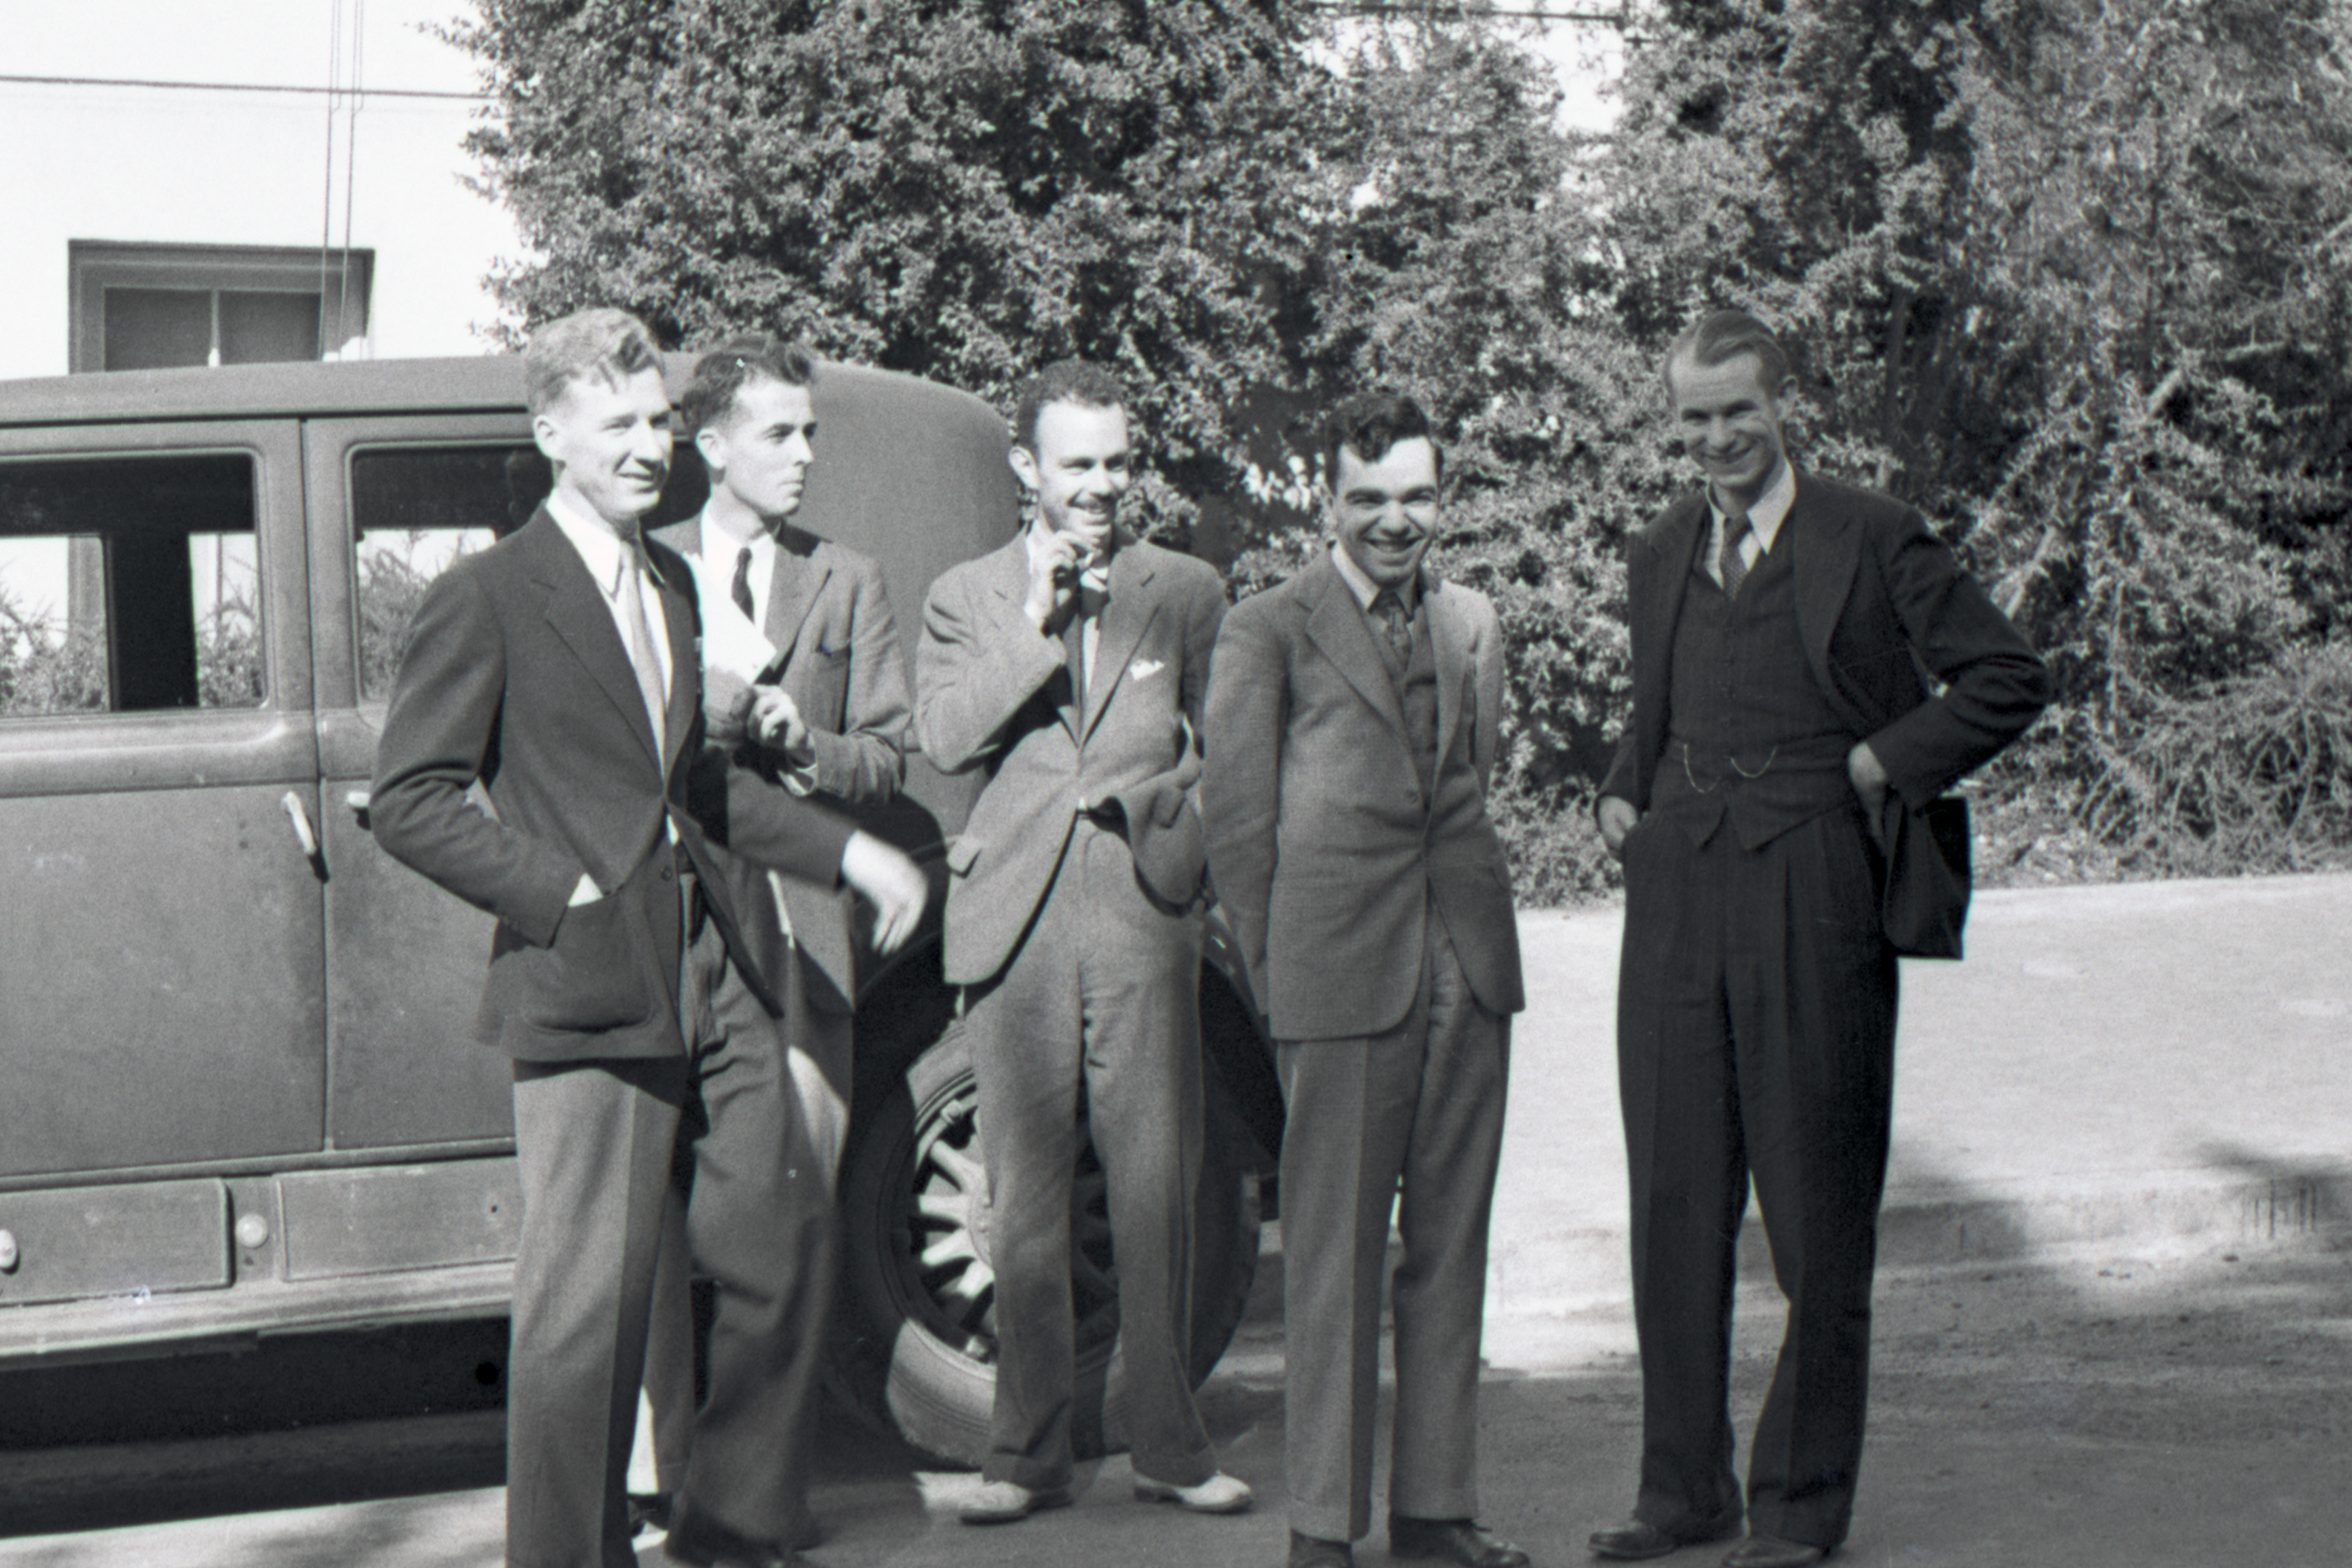 Black and white photograph of five men standing outside near a car